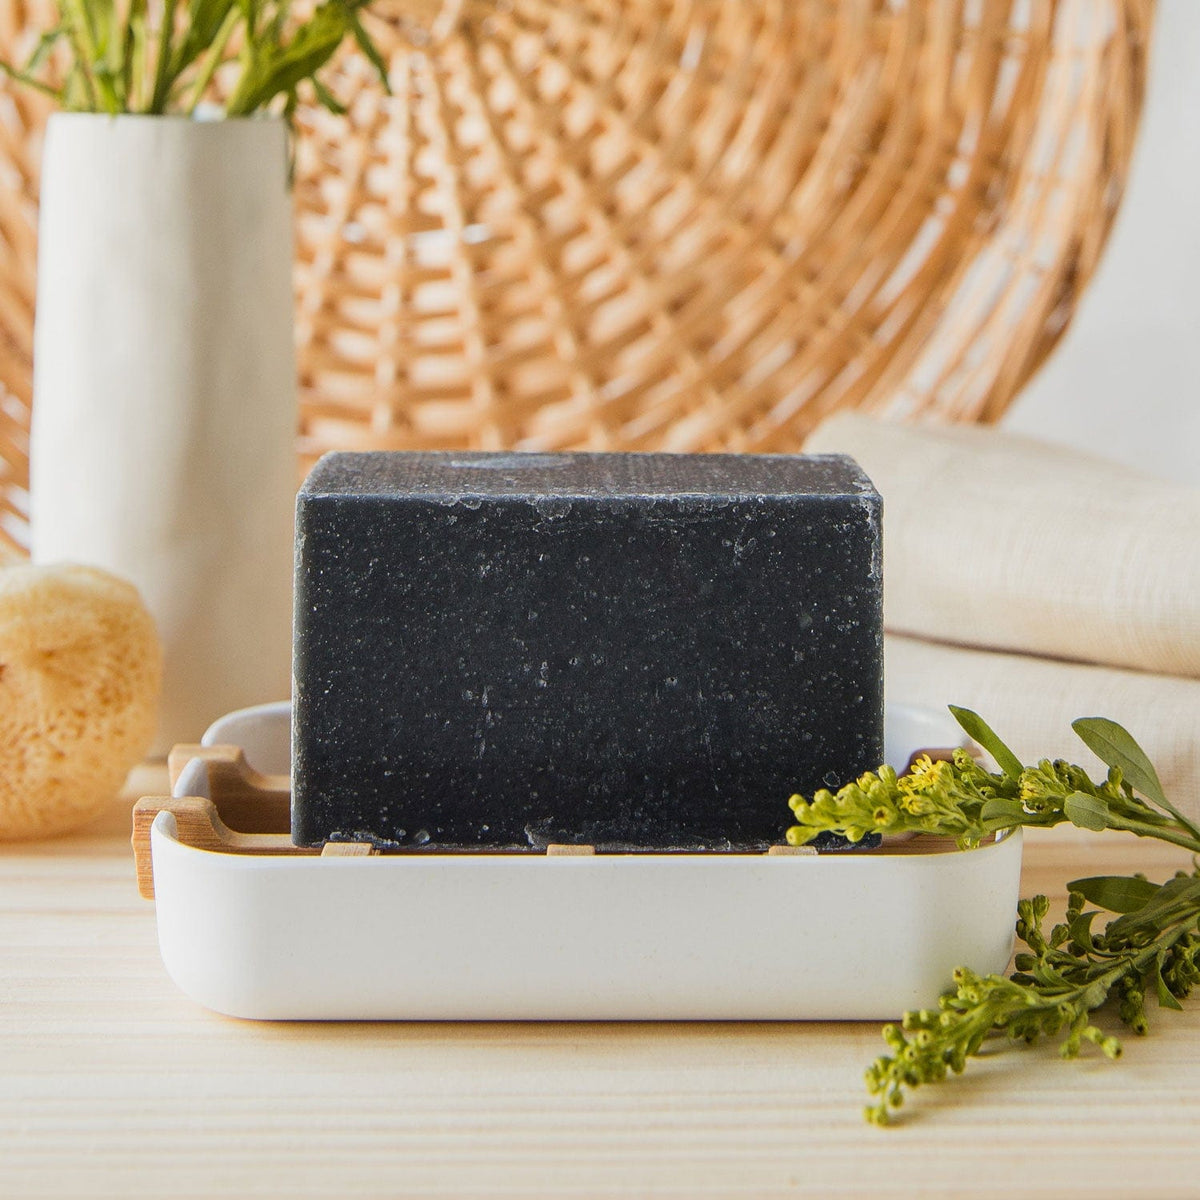 A block of black-colored soap on a white soap dish